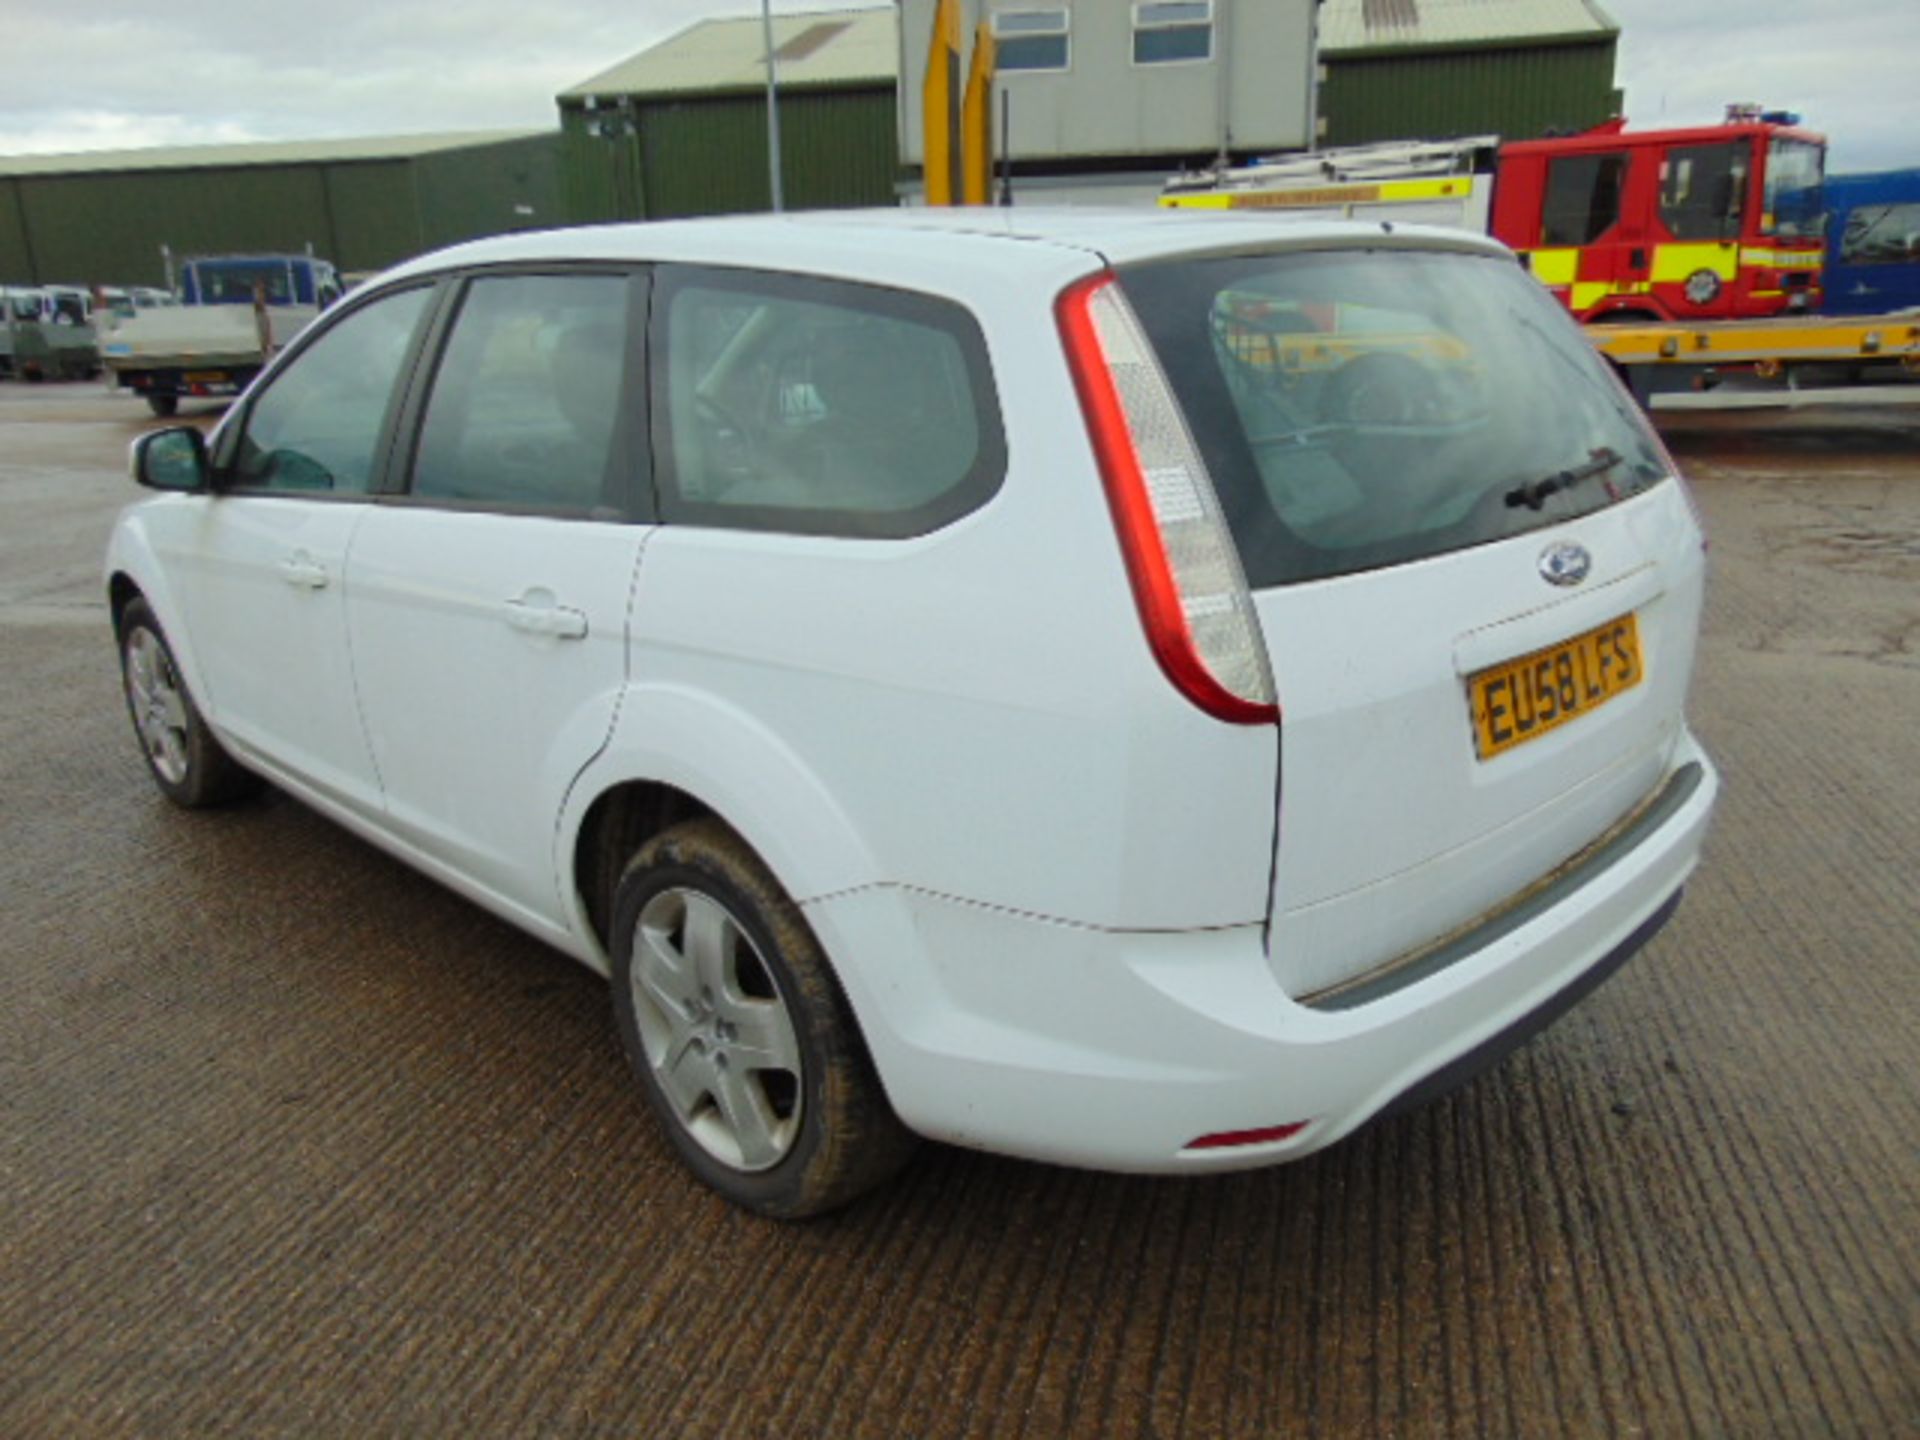 Ford Focus 1.8 Style Turbo Diesel Estate - Image 6 of 18